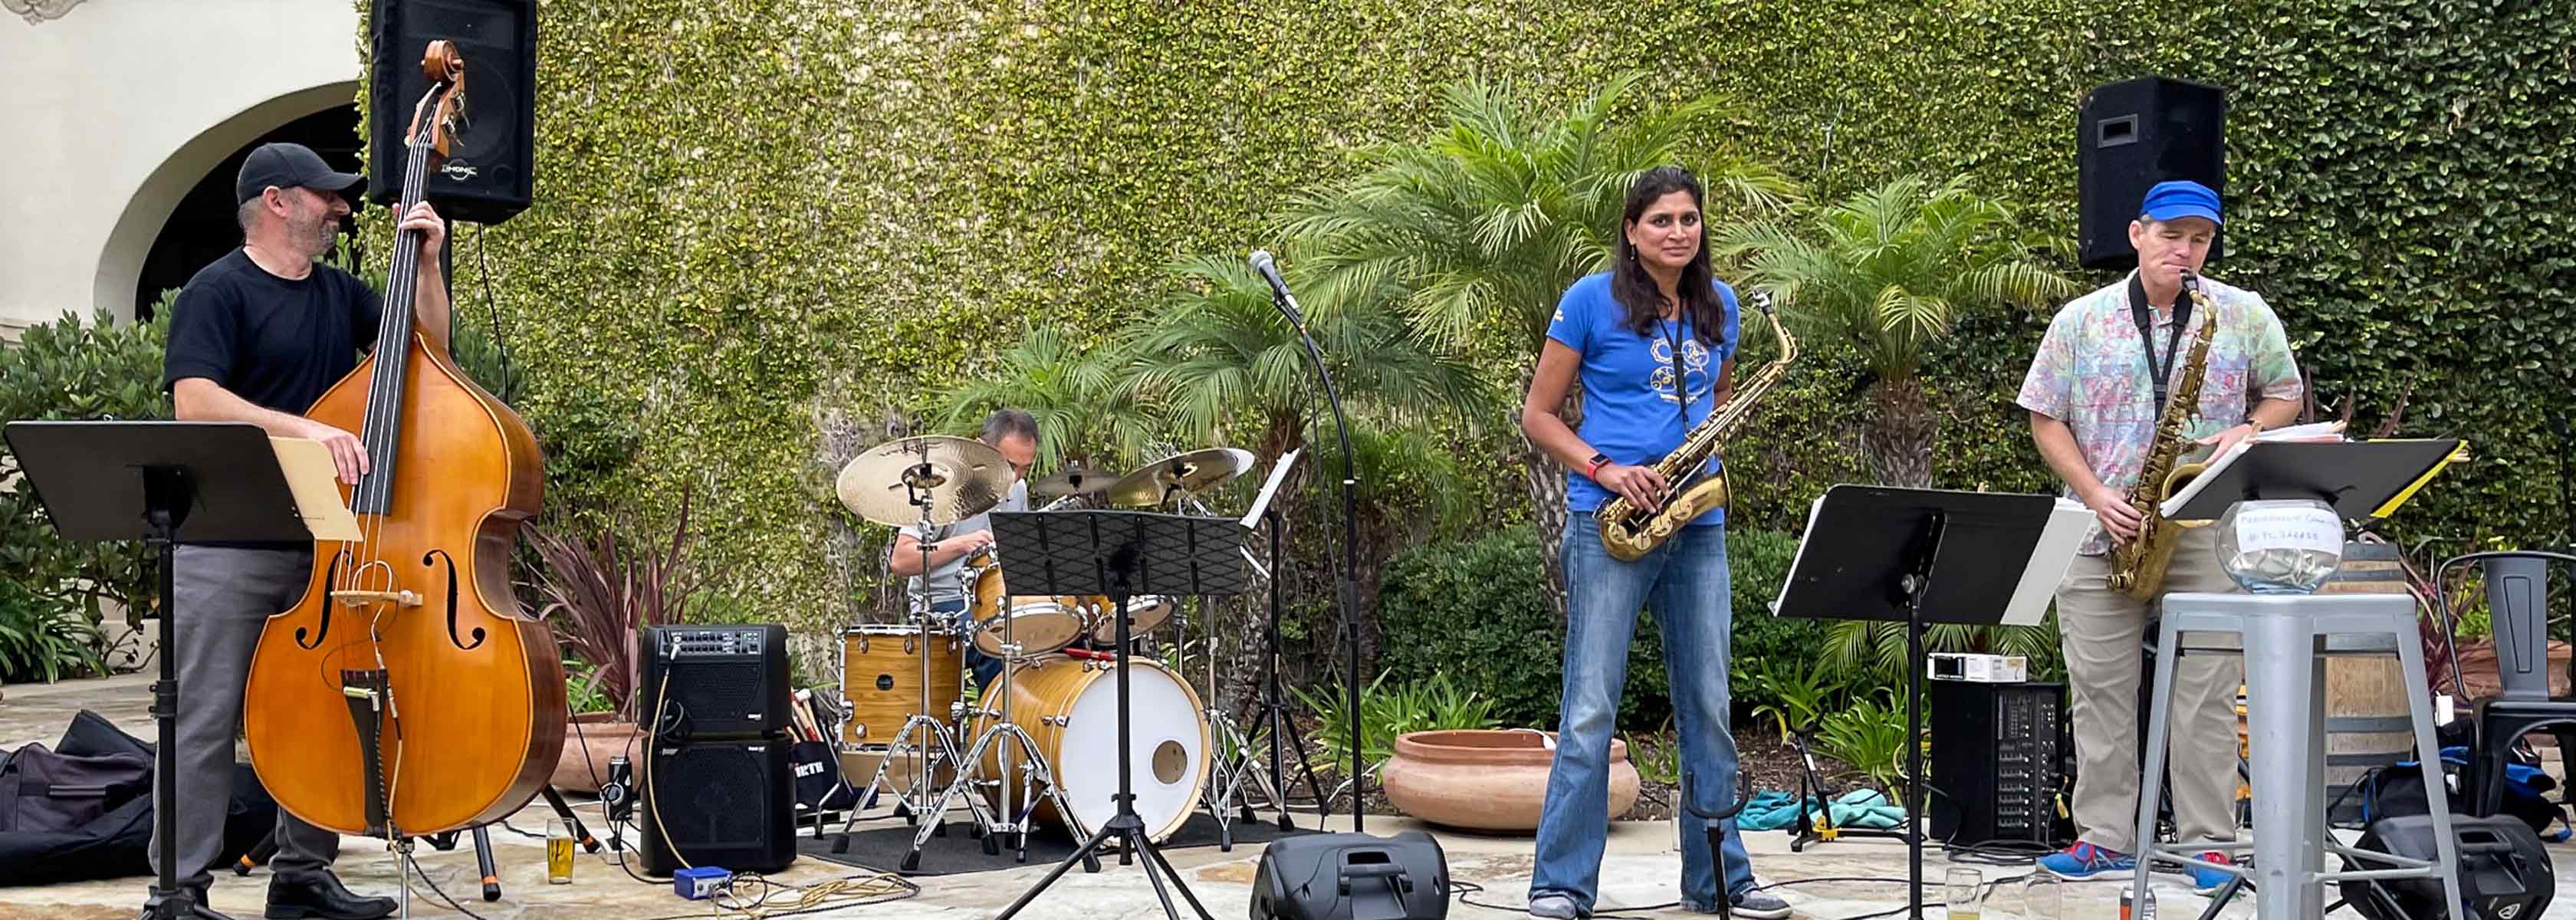 Previously Committed  performs at the grand reopening of the Santa Barbara Museum of Art